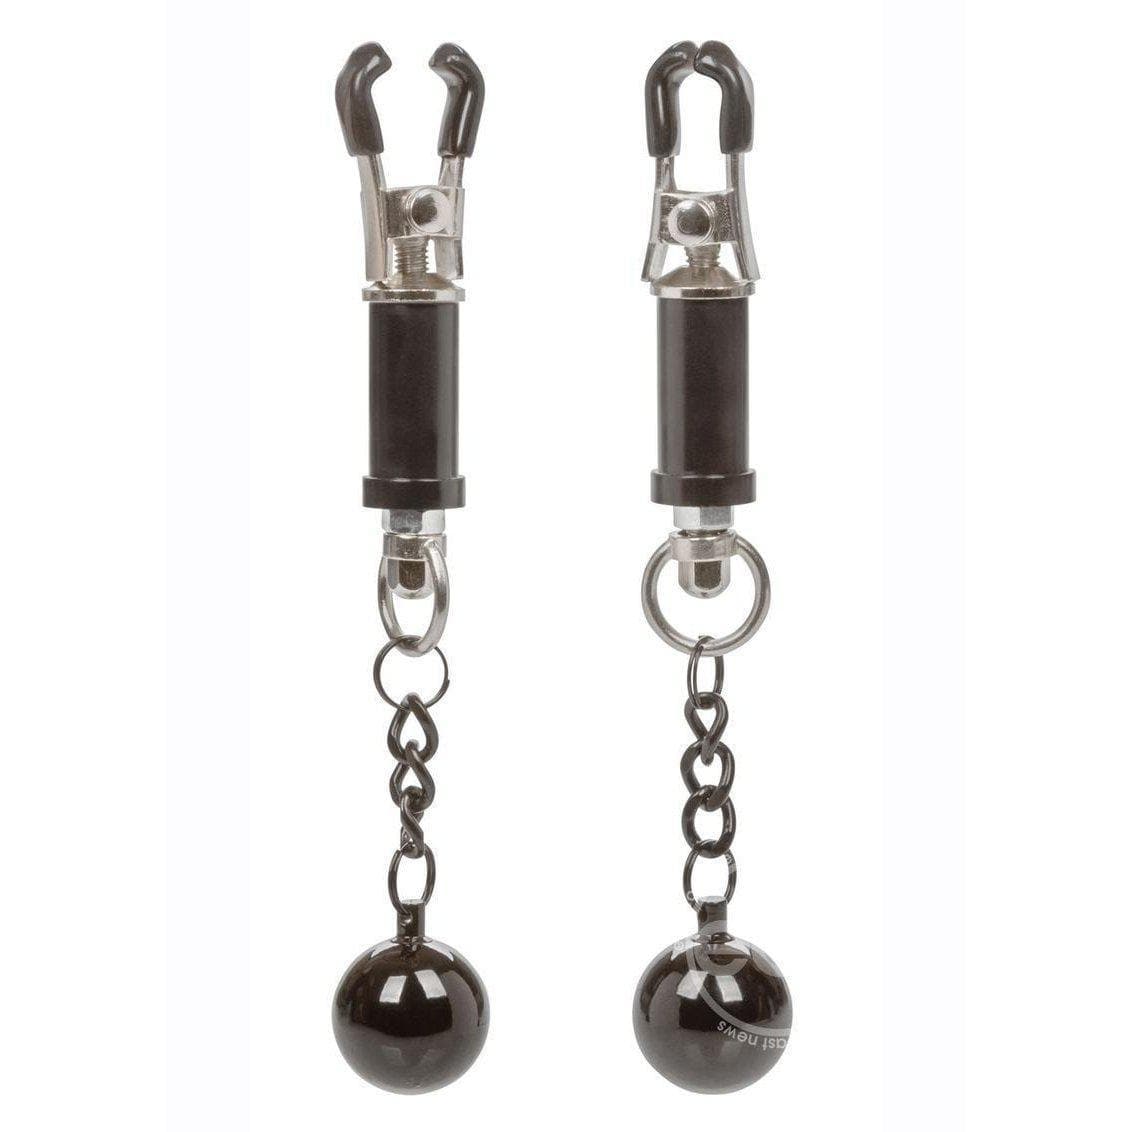 Nipple Grips Weighted Twist Nipple Clamps - Romantic Blessings